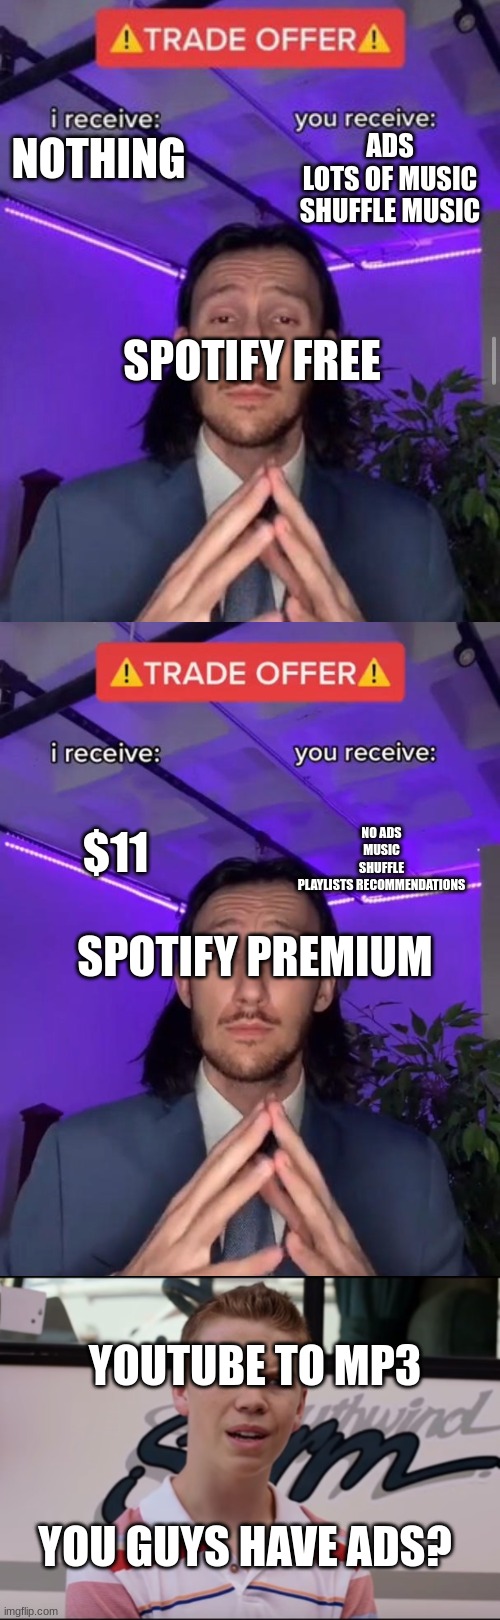 spotify be like | ADS
LOTS OF MUSIC
SHUFFLE MUSIC; NOTHING; SPOTIFY FREE; $11; NO ADS
MUSIC
SHUFFLE
PLAYLISTS RECOMMENDATIONS; SPOTIFY PREMIUM; YOUTUBE TO MP3; YOU GUYS HAVE ADS? | image tagged in i receive you receive,trade offer,you guys are getting paid | made w/ Imgflip meme maker